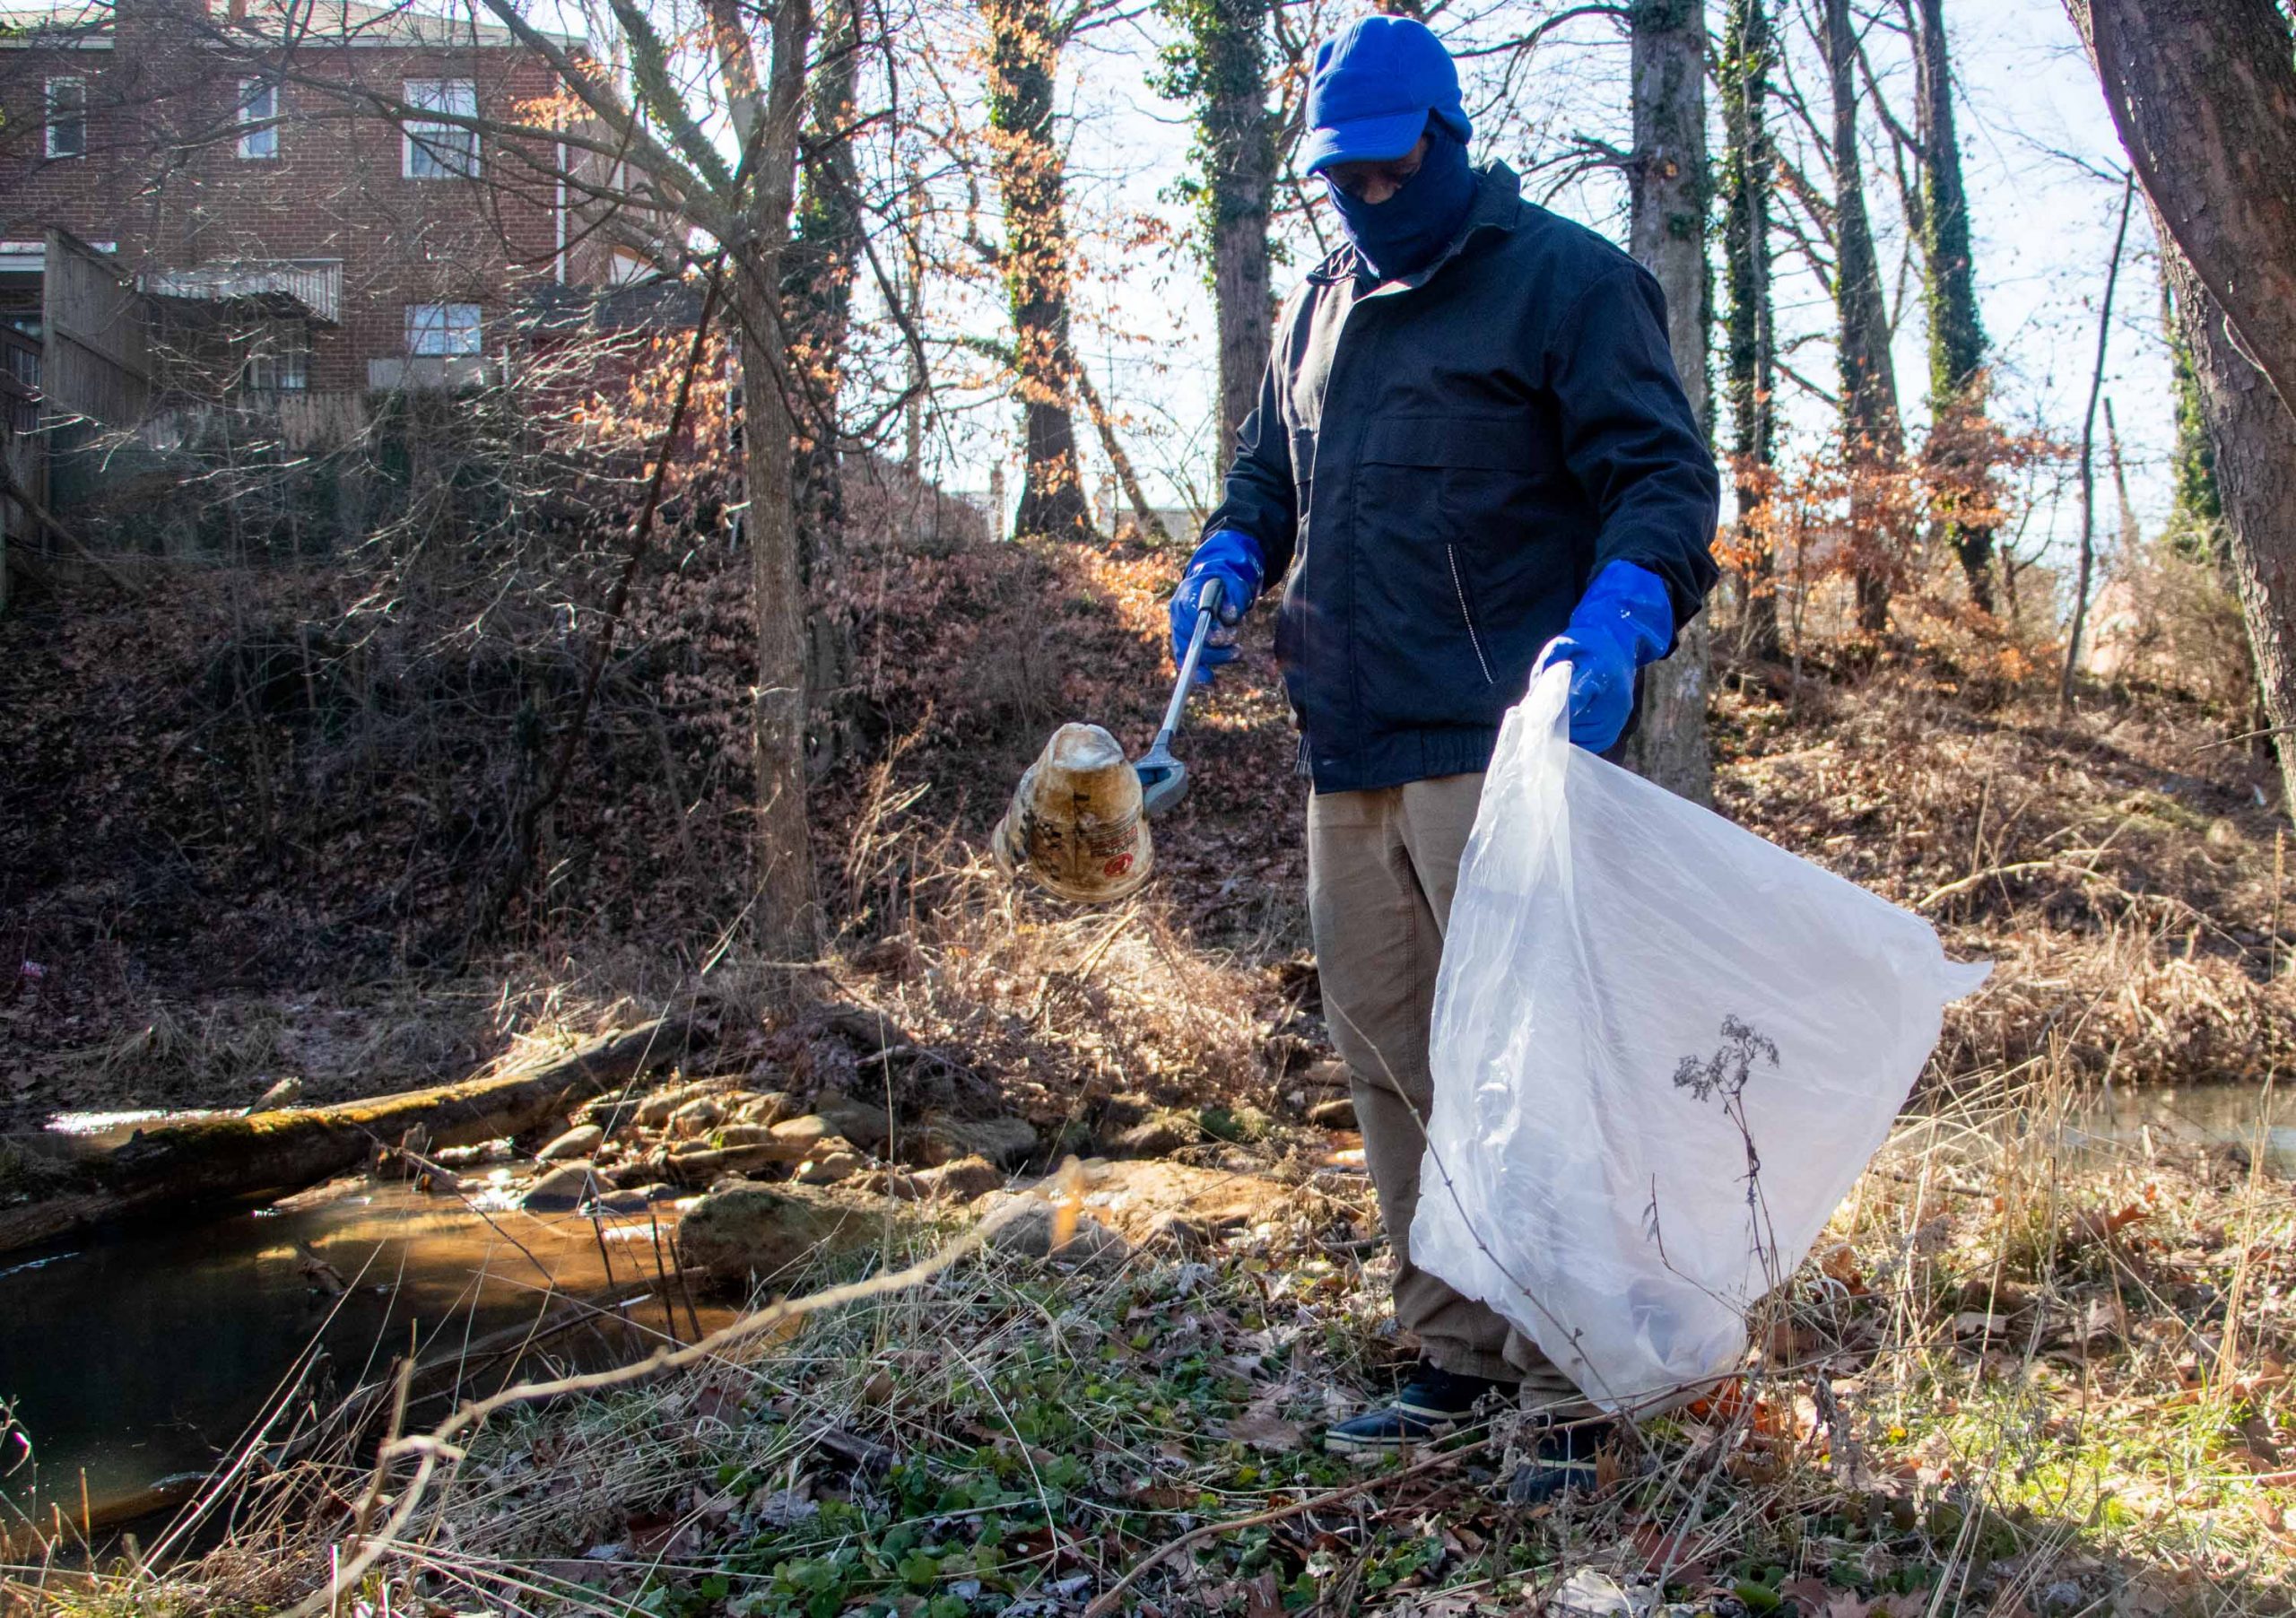 Clarence Elliott, a literacy teacher, picks up a plastic water bottle from near the Pope Branch Stream Saturday during the cleanup in honor of Martin Luther King Day. (Isabel Miller | Medill News Service)